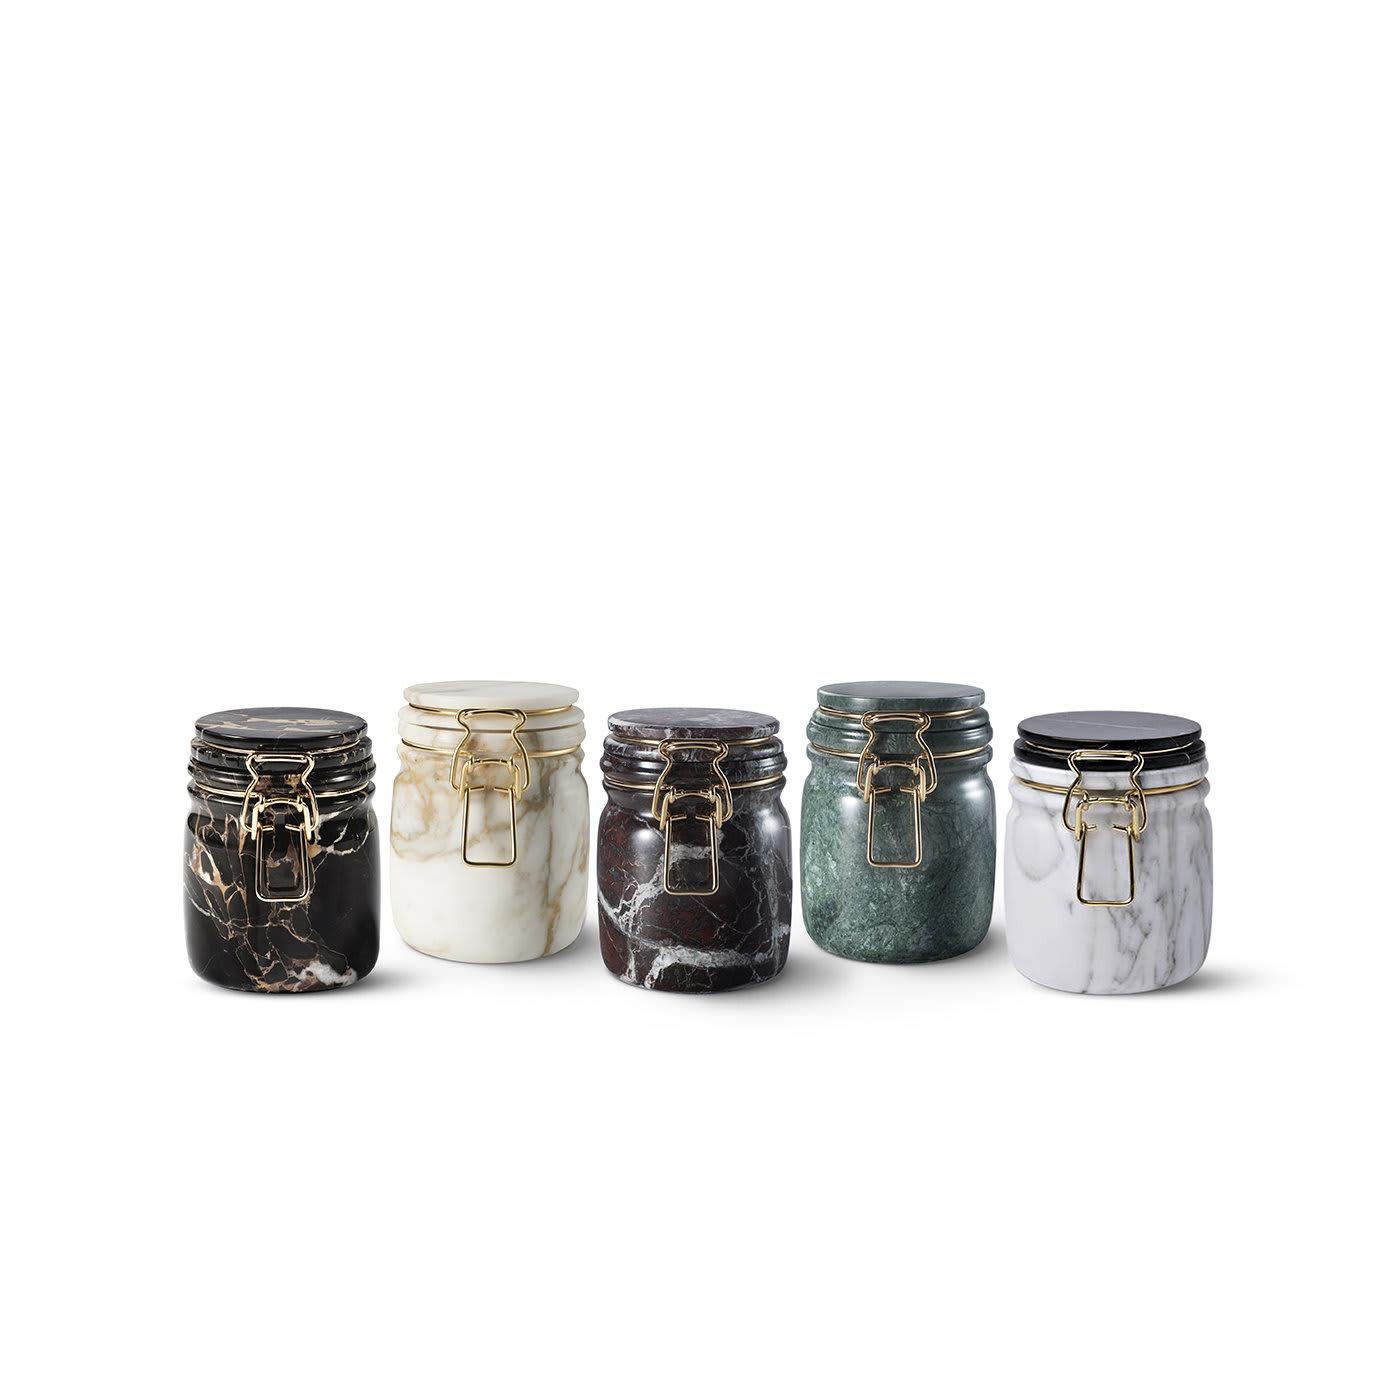 This exquisite piece is a sophisticated and modern take on the iconic marmalade jar. Crafted using traditional methods, it is made of Green Guatemala marble, whose vivid green shade and unique veins grace both the body and lid of the jar. The latch